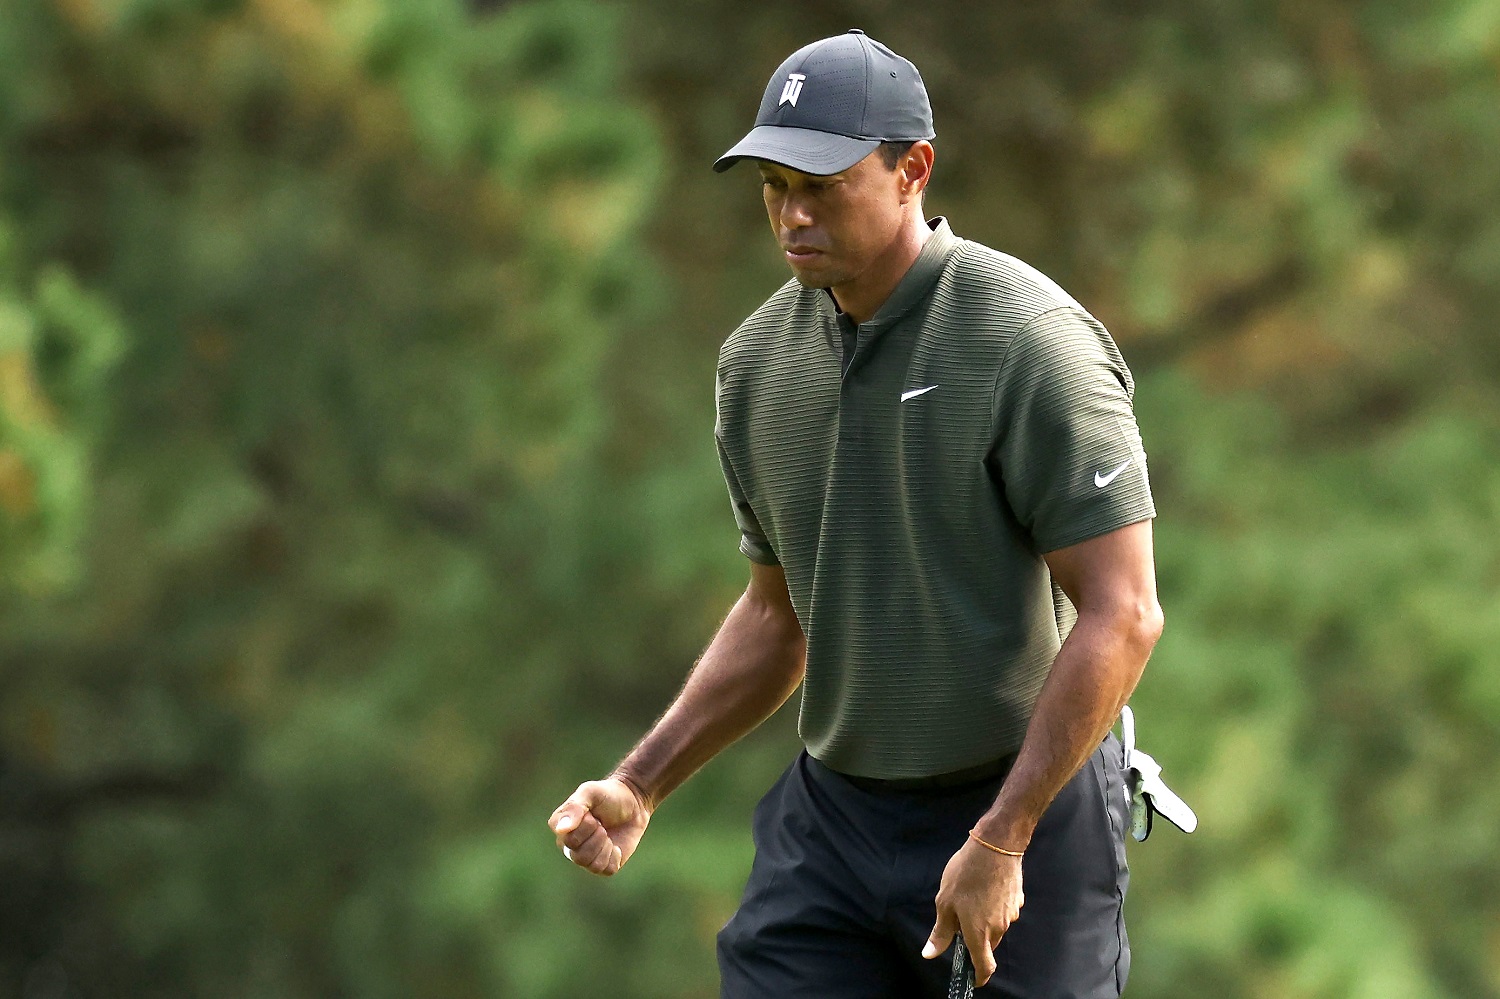 Tiger Woods Just Did Something He's Only Done Once Before at The Masters